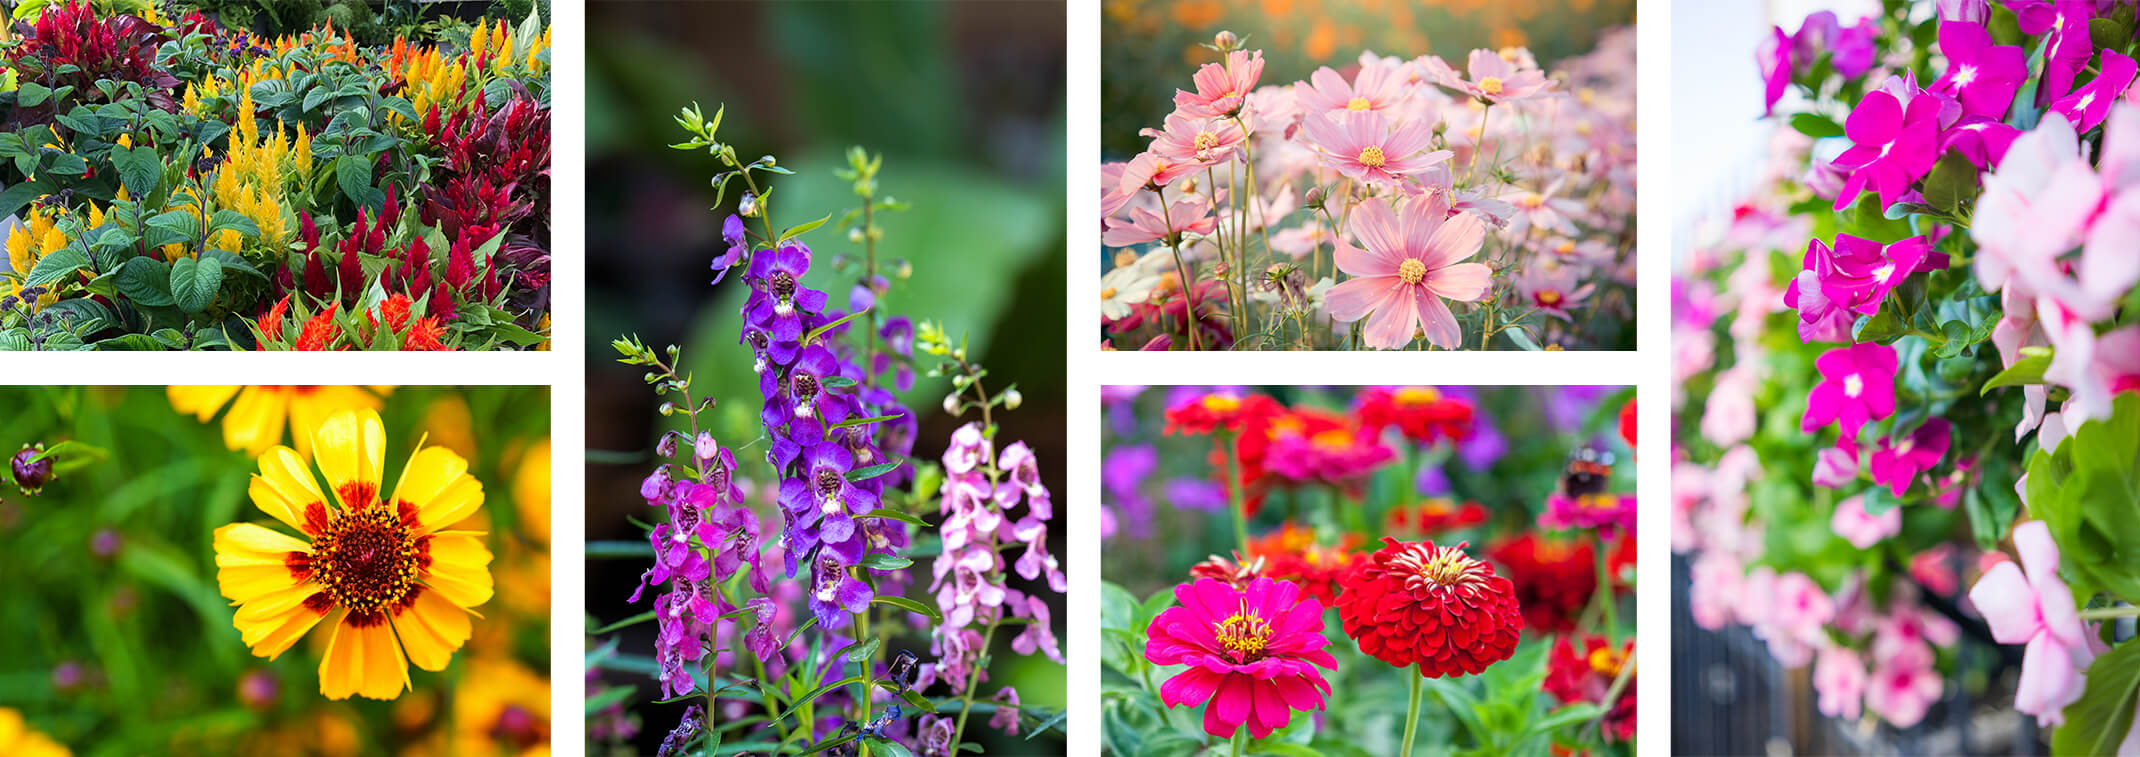 a collage of flowers including: celosia, coreopsis, angelonia, cosmos and vinca, zinnia,  